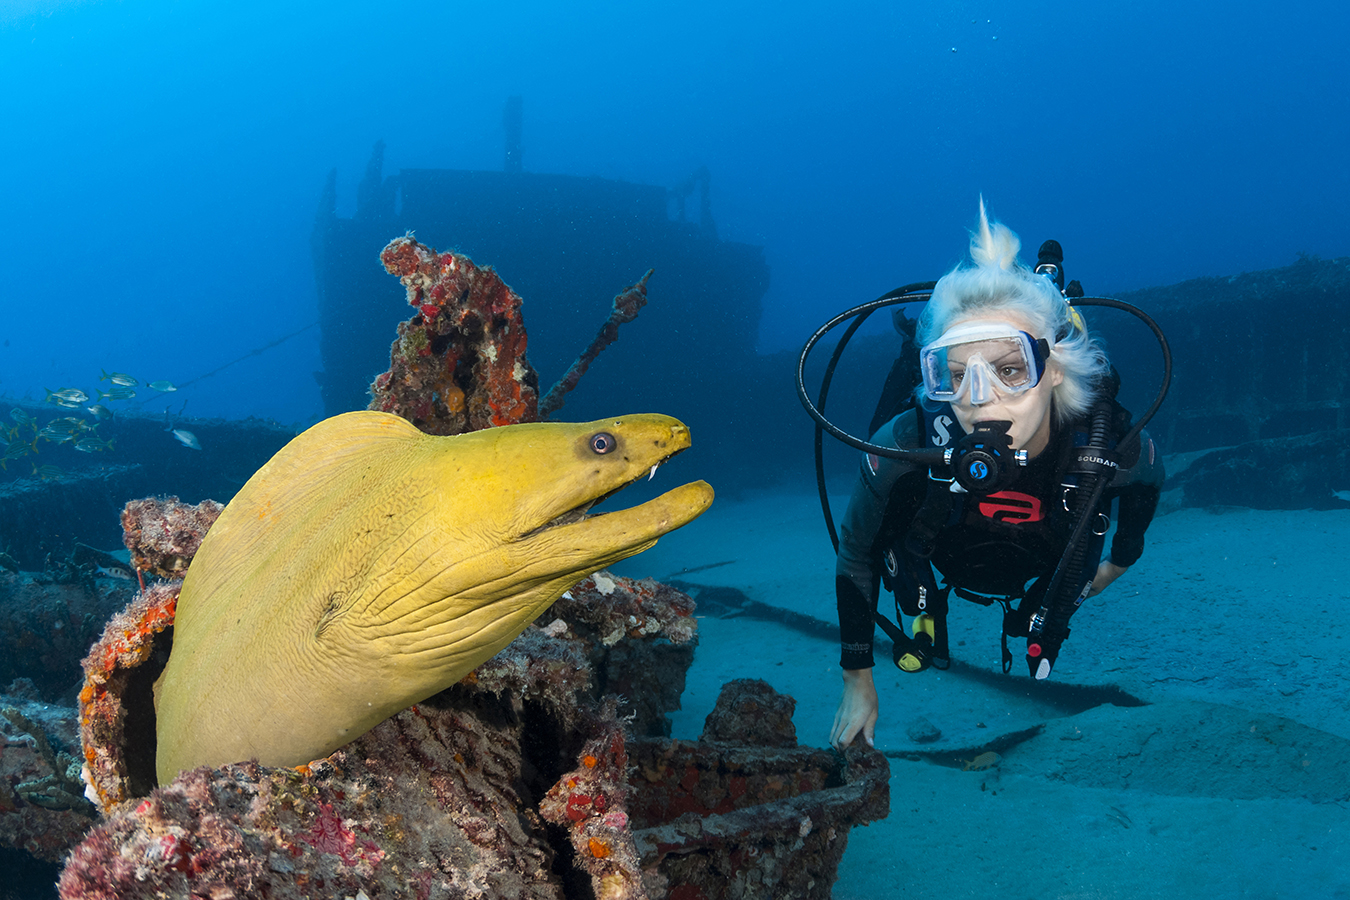 - Diver with Green Moray – When you come across a great moment like this scenario of a diver coming up on very large green moray, clear communication is imperative. Get your signals crossed and it could result in a complete disconnect between your buddy and the subject, leaving your buddy looking like a deer in the headlights.